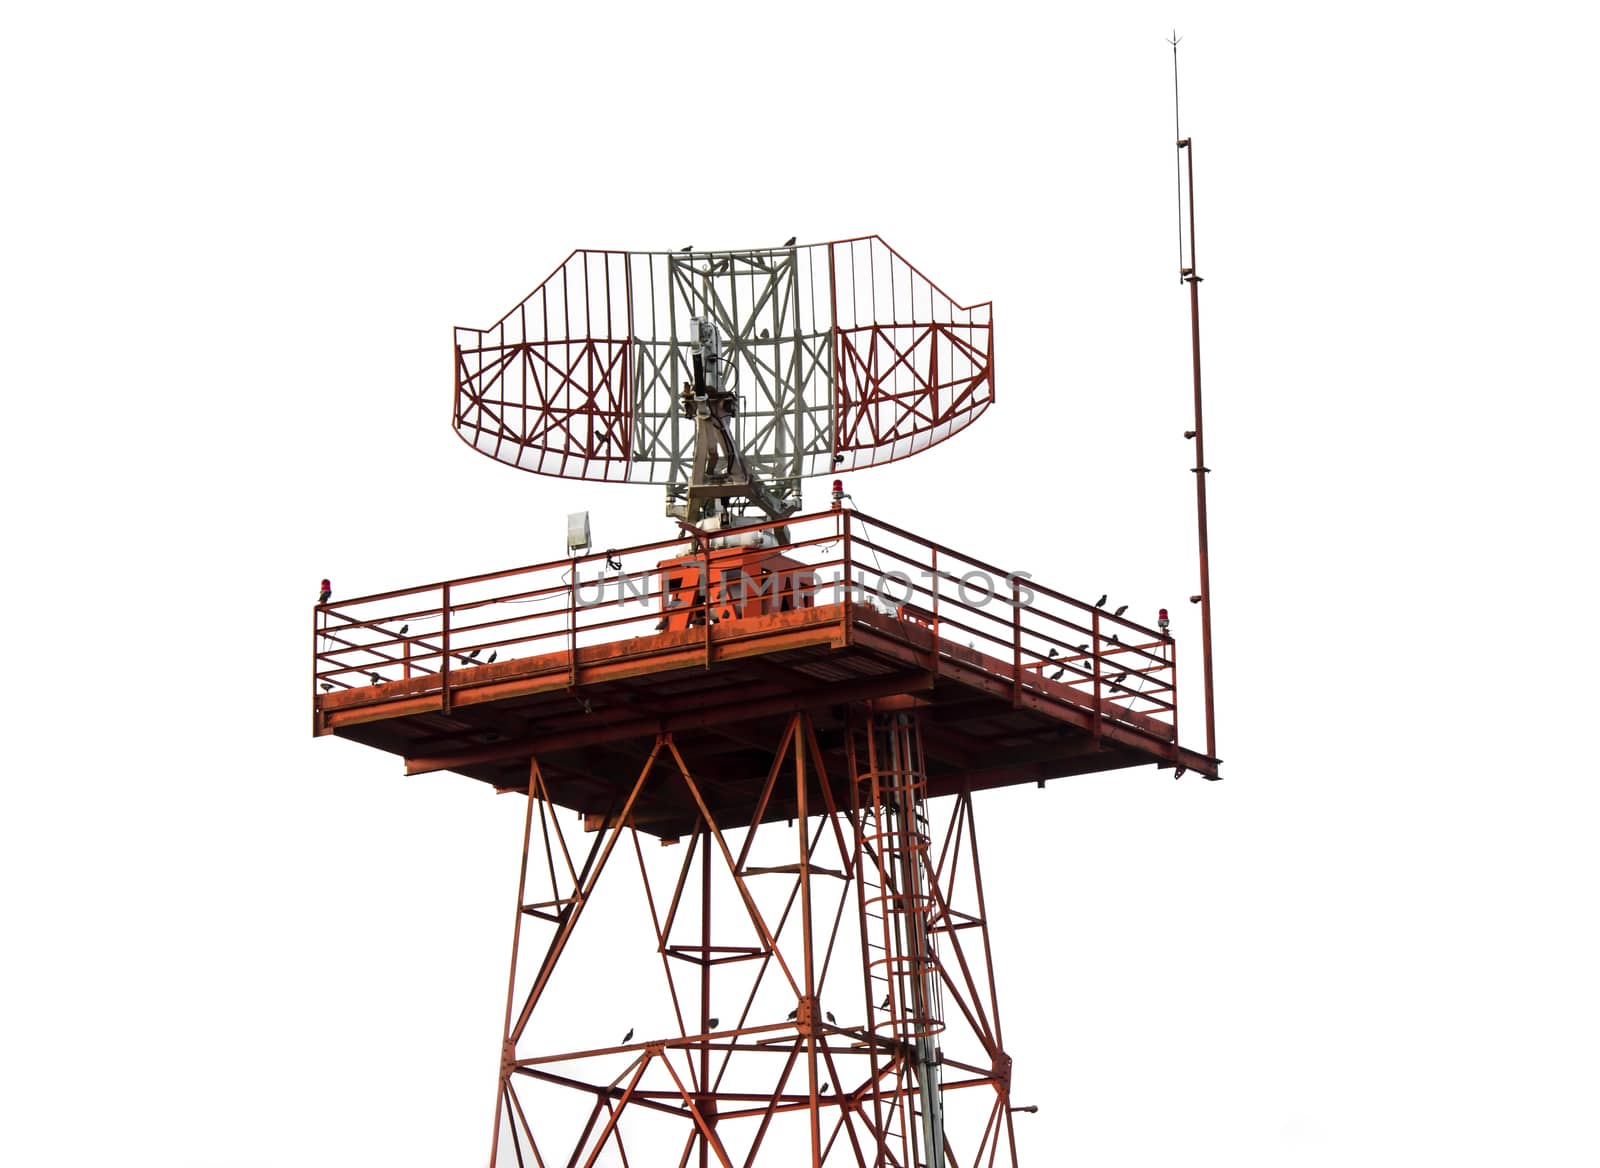 Red and white metal radar tower in airport area with plane landing